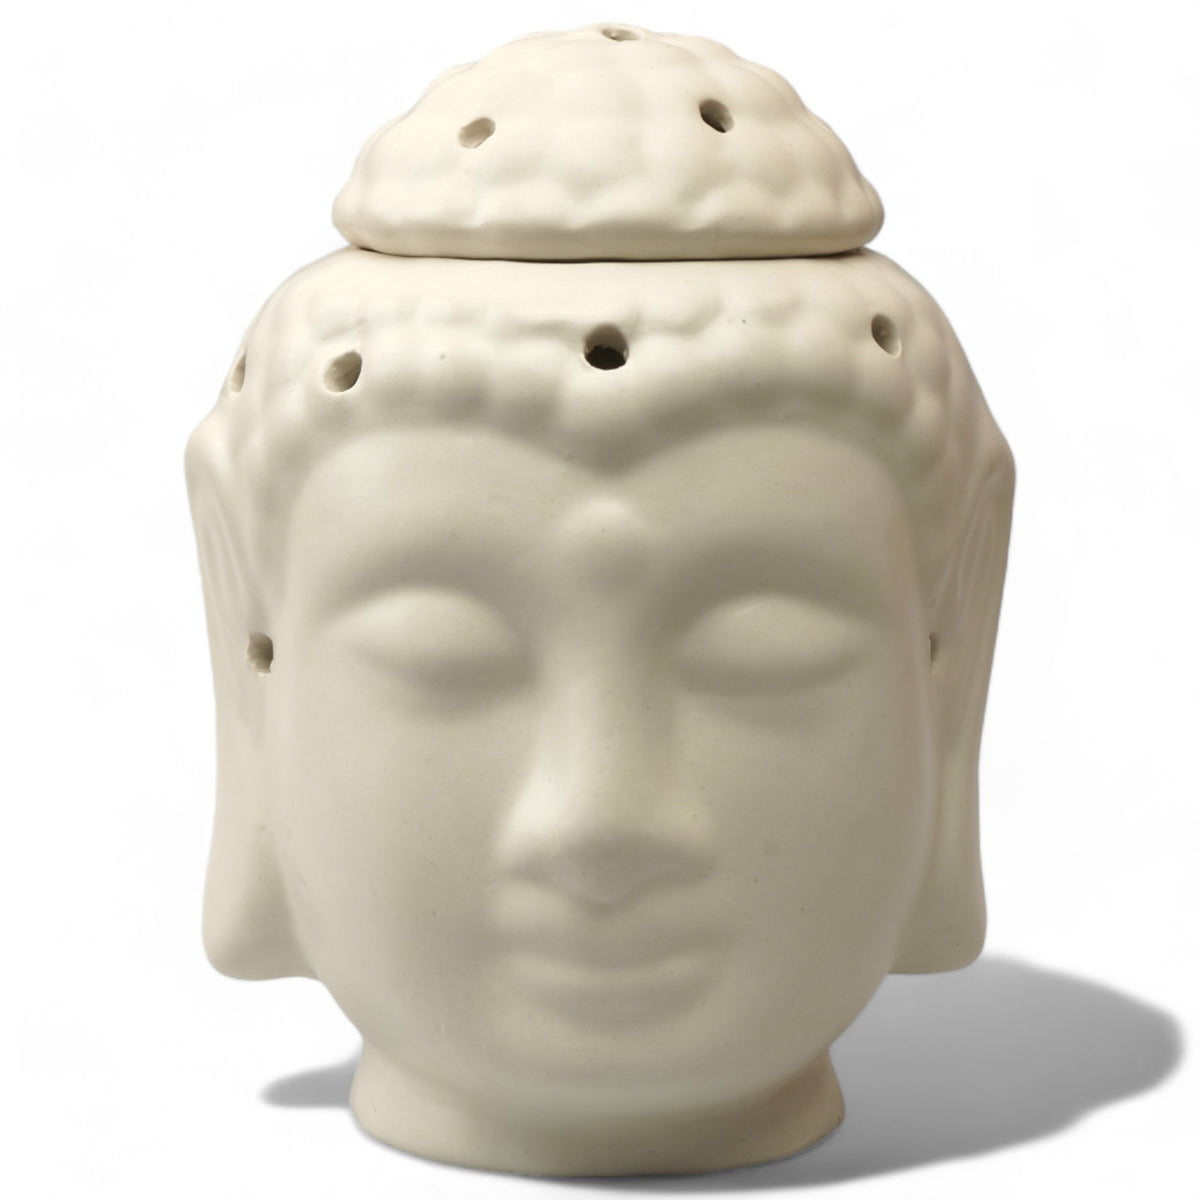 Claymistry Ceramic Electric Ivory Aroma Buddha Lamp Diffuser | 18cm * 18cm * 20cm | Matte Finish | Aroma Oil Burner for Aromatherapy | Home Decor and Fragrance with Aroma Oil (Jasmine Fragrance 10 ml)